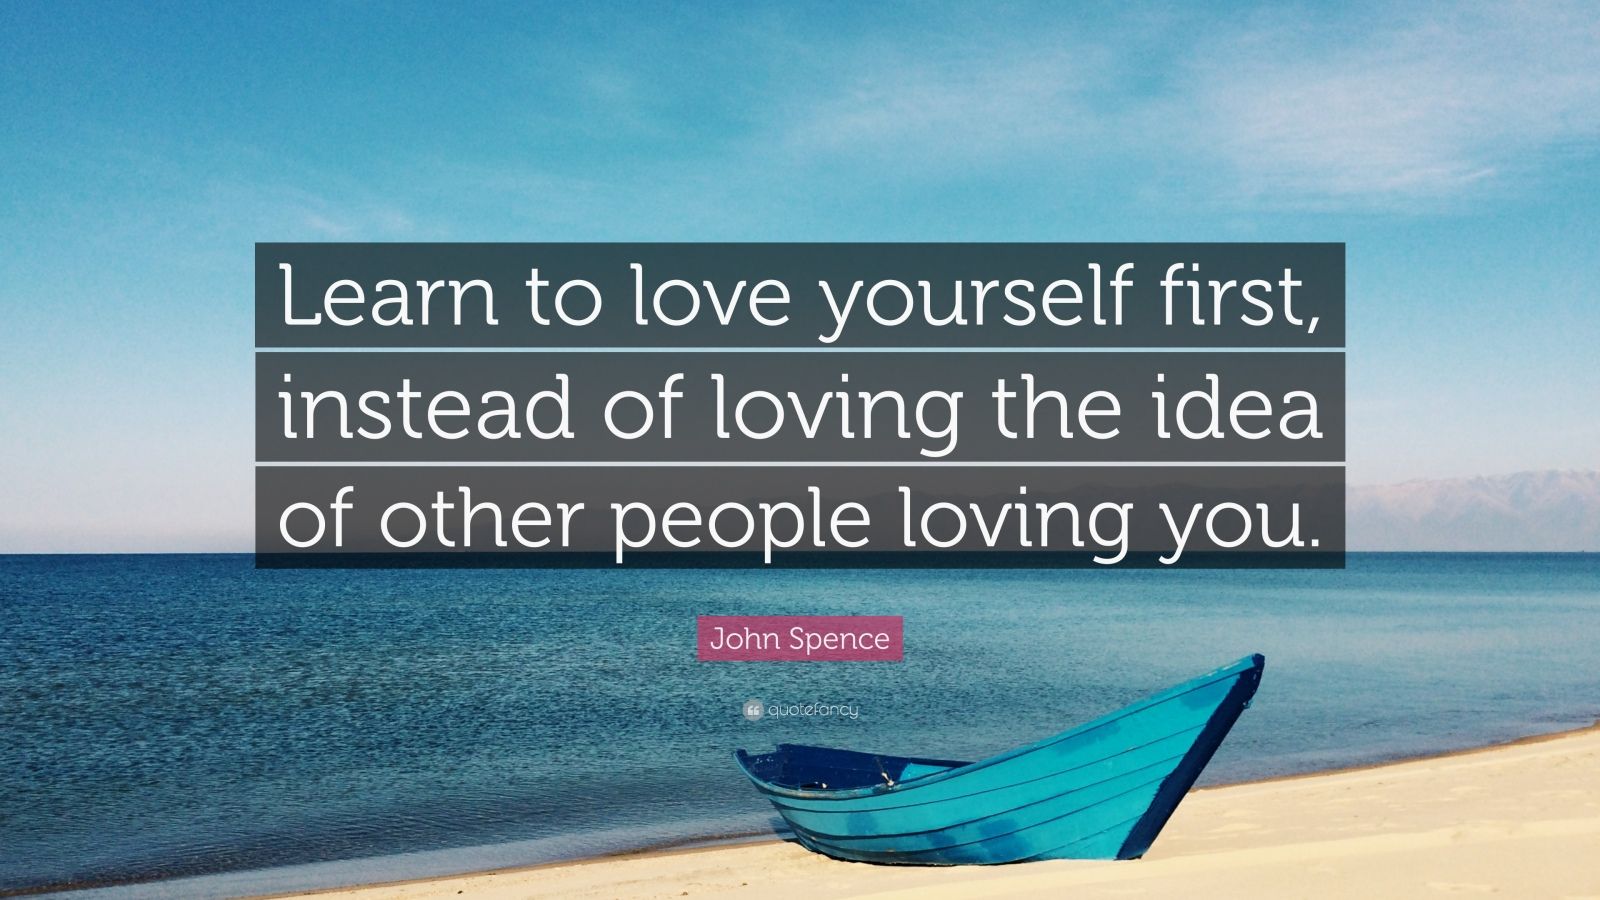 John Spence Quote: “Learn to love yourself first, instead of loving the